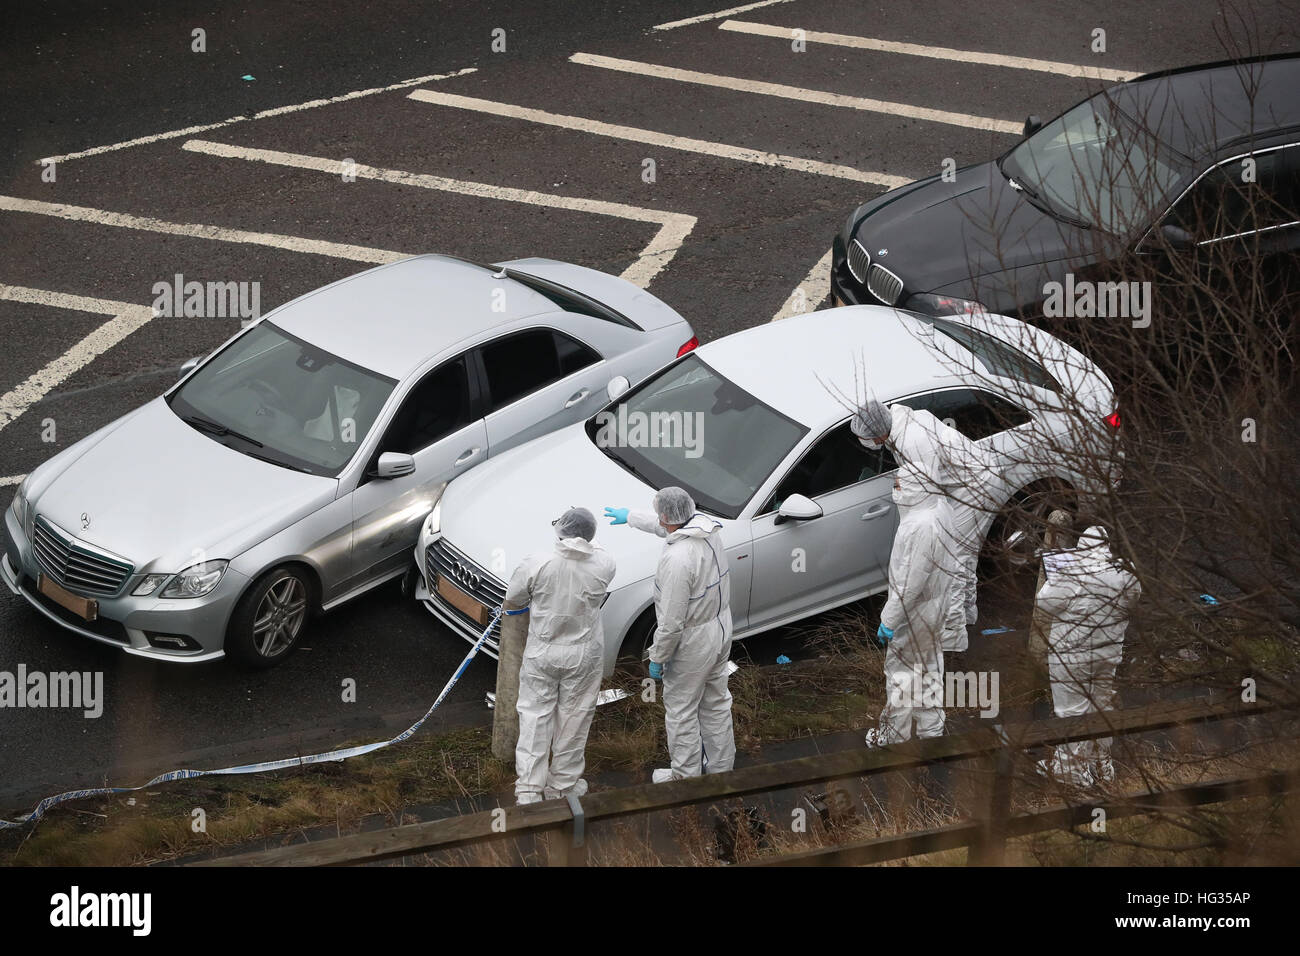 Police forensics officers examine a silver Audi with bullet holes in its windscreen at the scene near junction J24 of the M62 in Huddersfield where a man died in a police shooting during a 'pre-planned' operation at around 6pm on Monday. Stock Photo